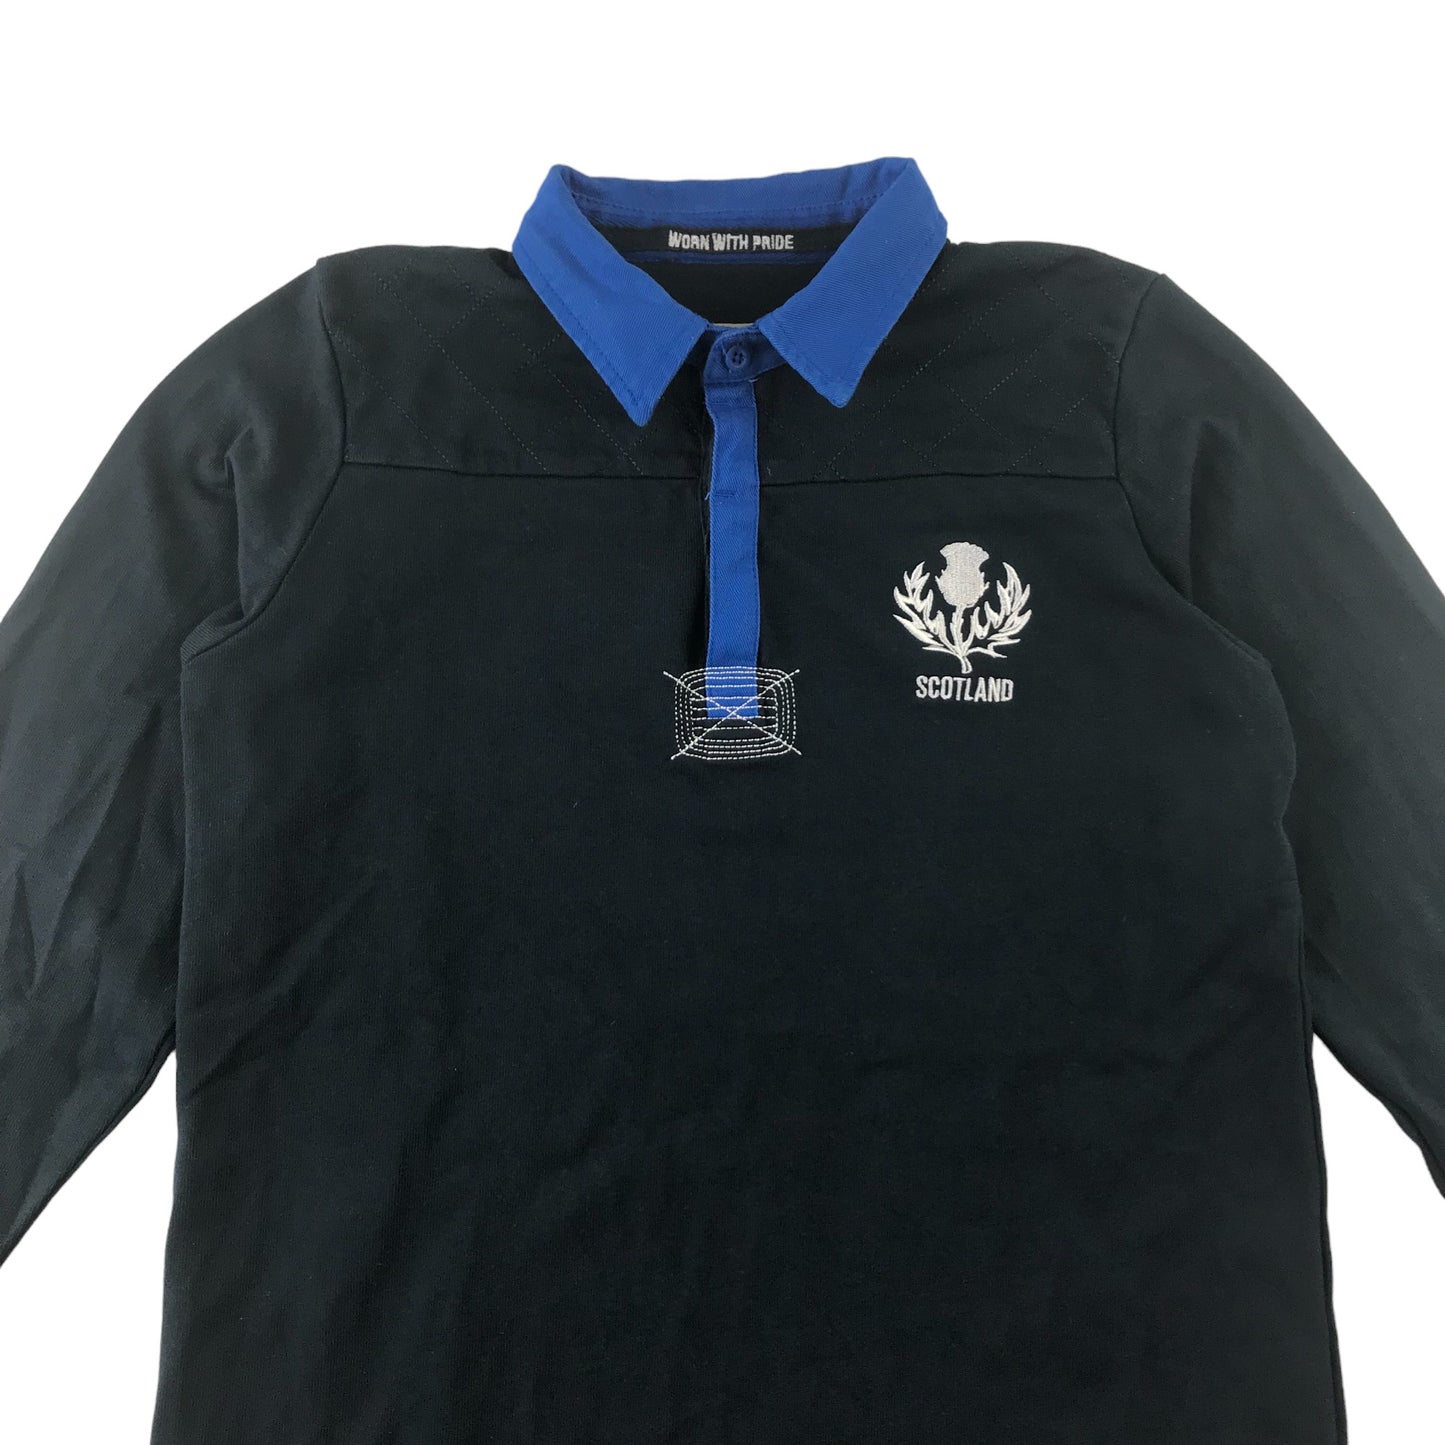 Rugby Heritage Sports Top Age 11 Black with Blue Collar Cotton